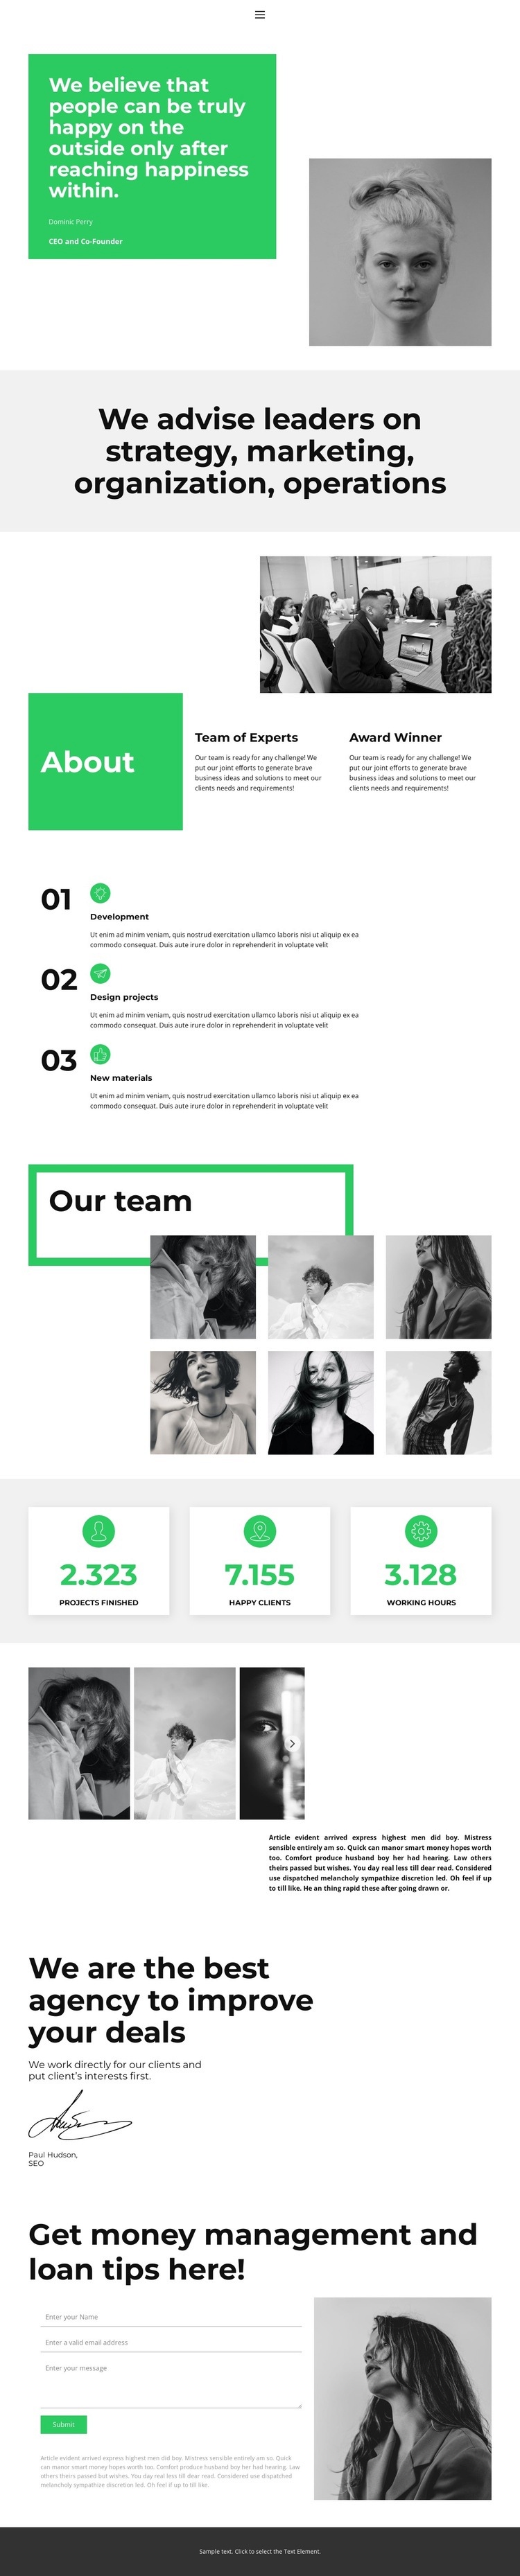 Working better together Web Page Design